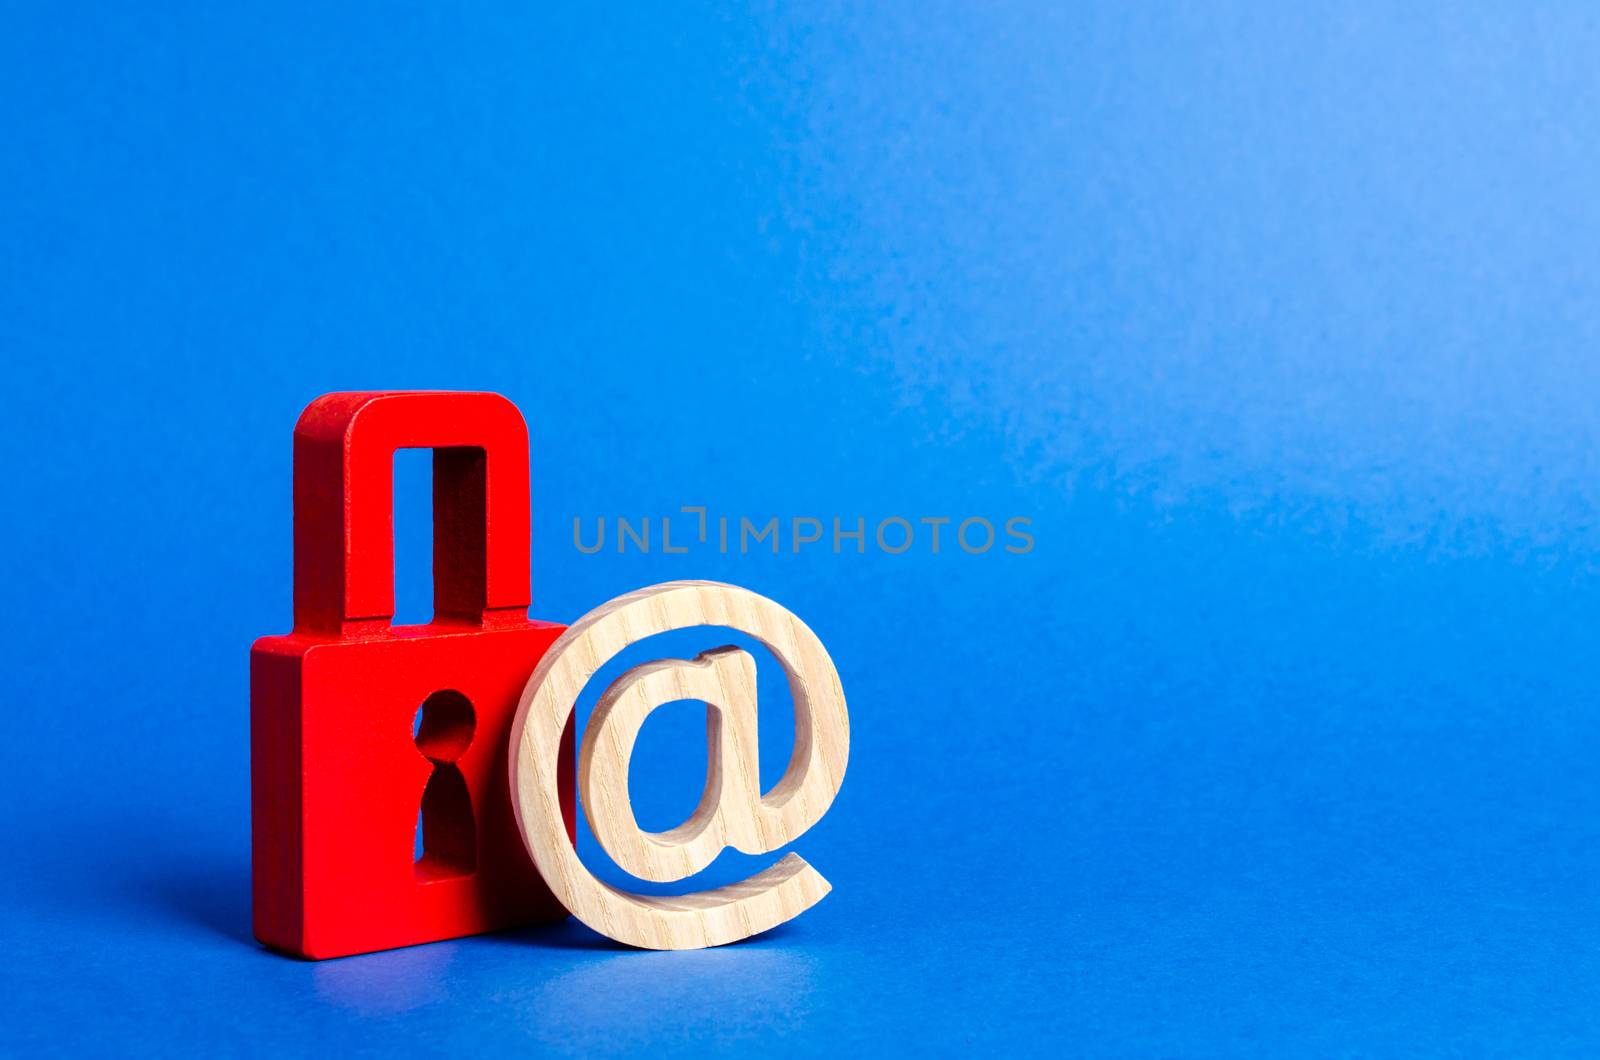 Email symbol and red padlock. Protection against Internet threats and hacker attacks. Safety of personal data, privacy of users. Safe surfing global network, unwanted content NSFW. Virus, antivirus by iLixe48